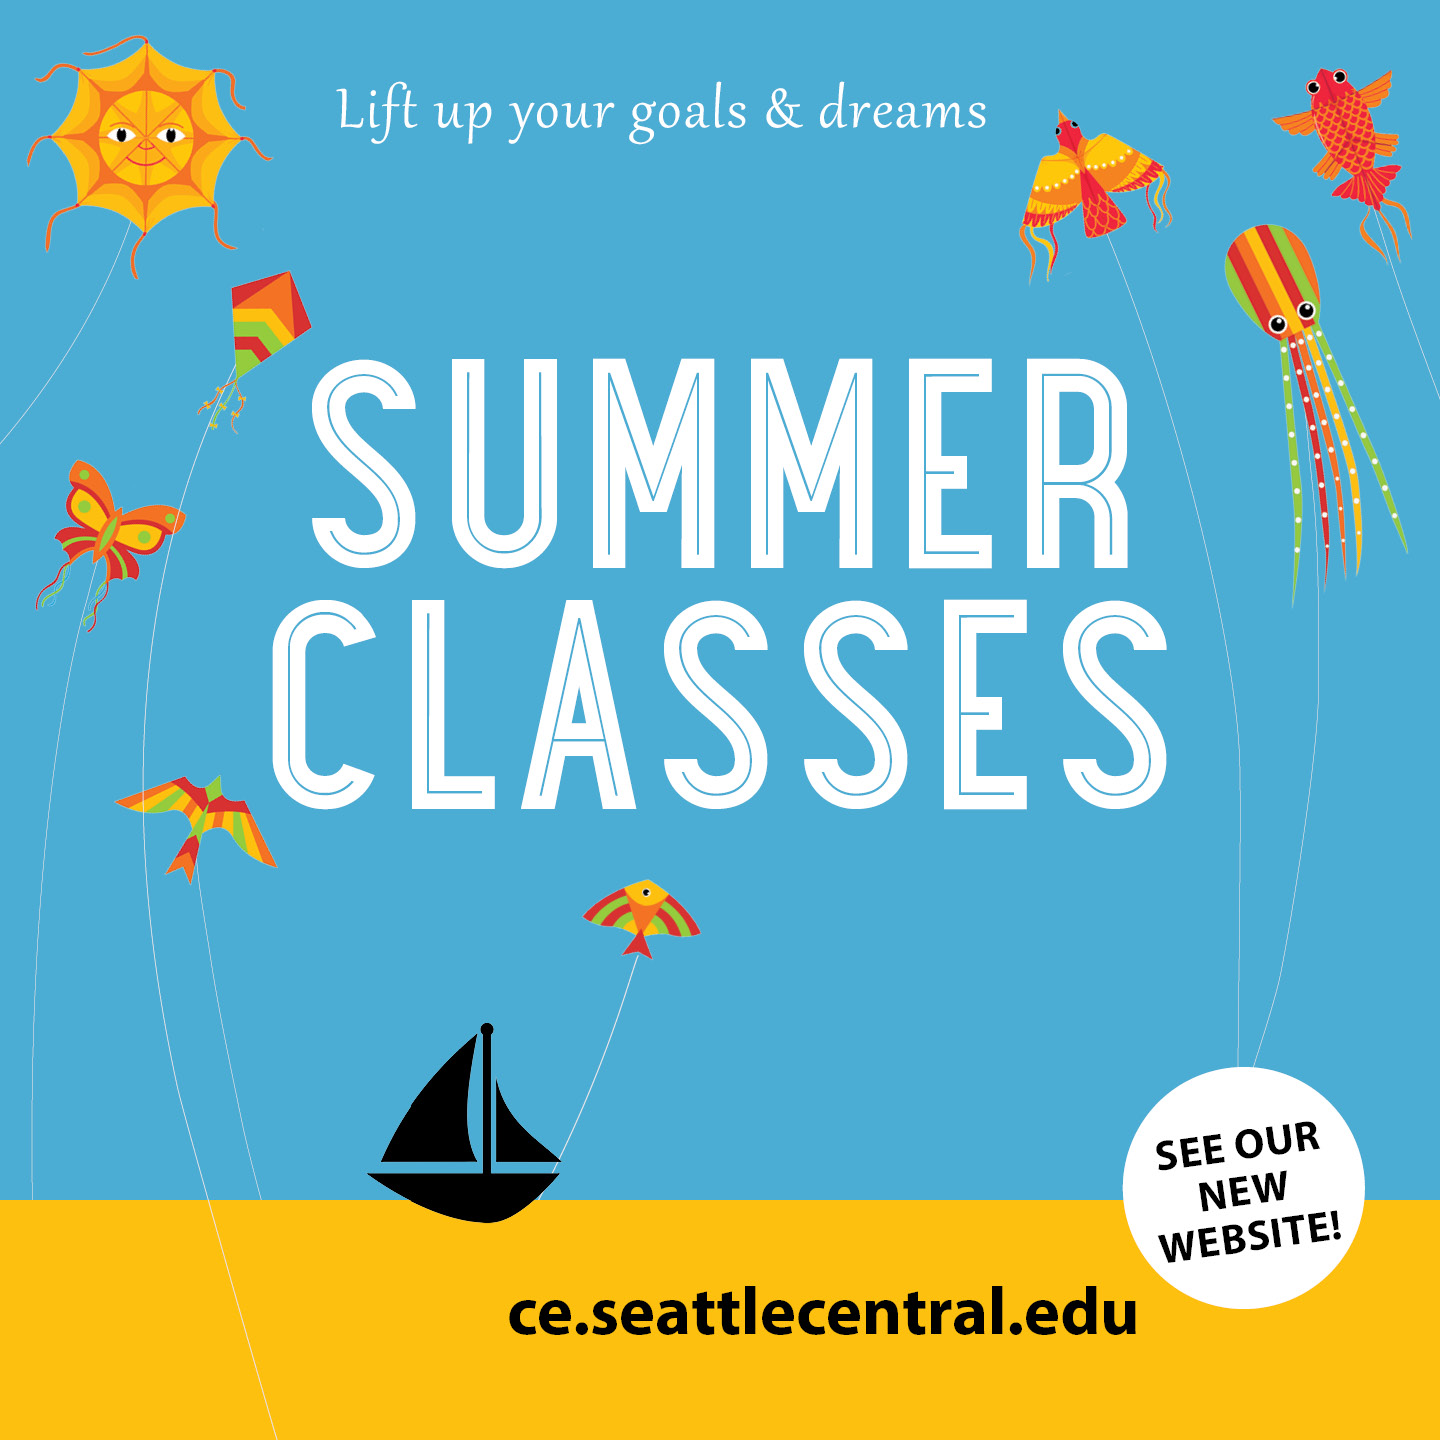 Let Summer Classes Lift You Up Continuing Education